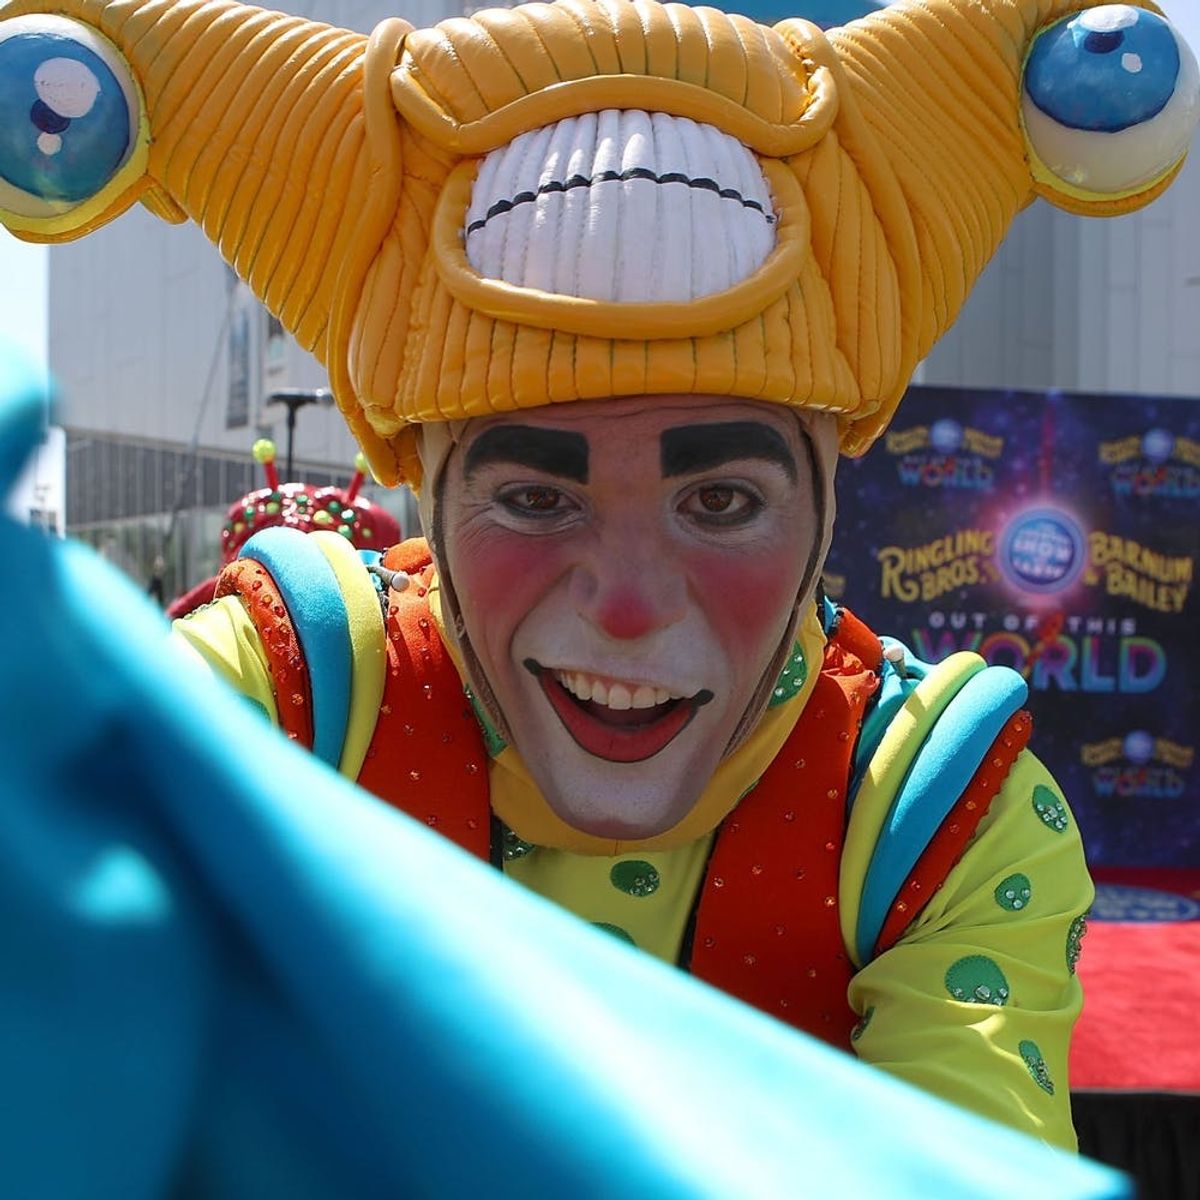 The Ringling Bros. Circus Will Take Its Final Curtain Call After 146 Years in the Biz